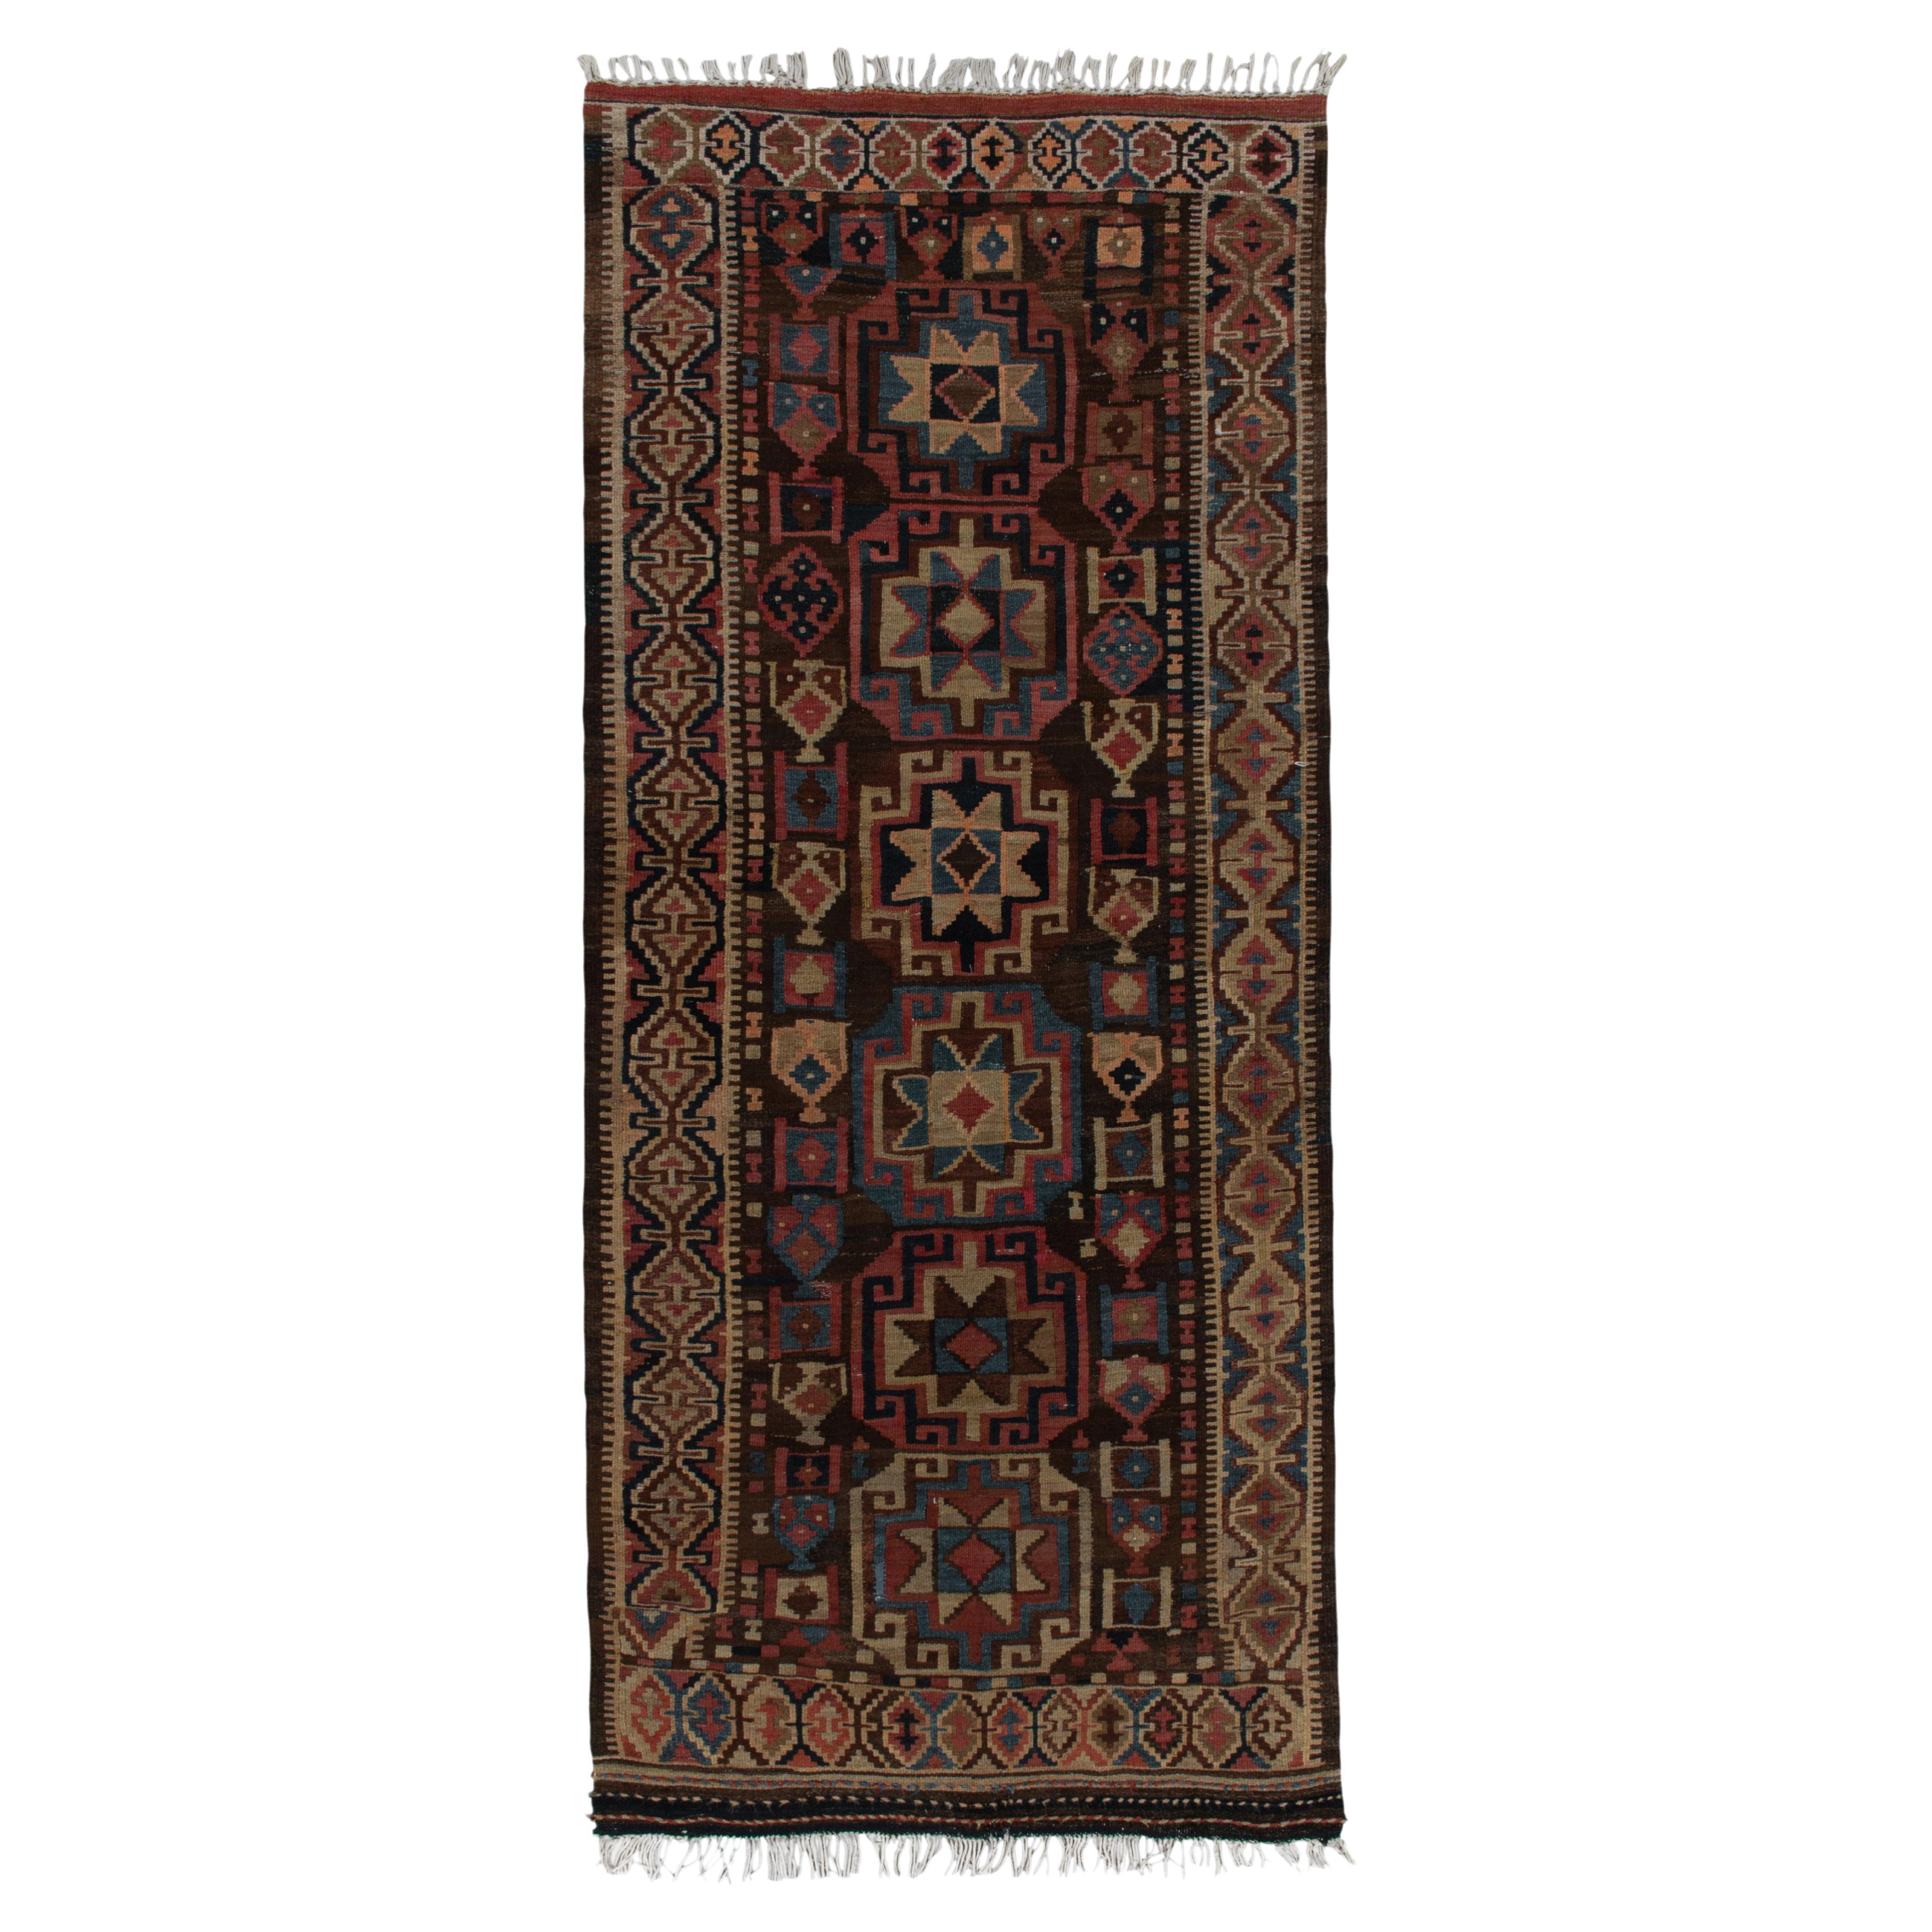 Antique Kurdish Kilim Runner in Brown With Geometric Patterns, From Rug & Kilim